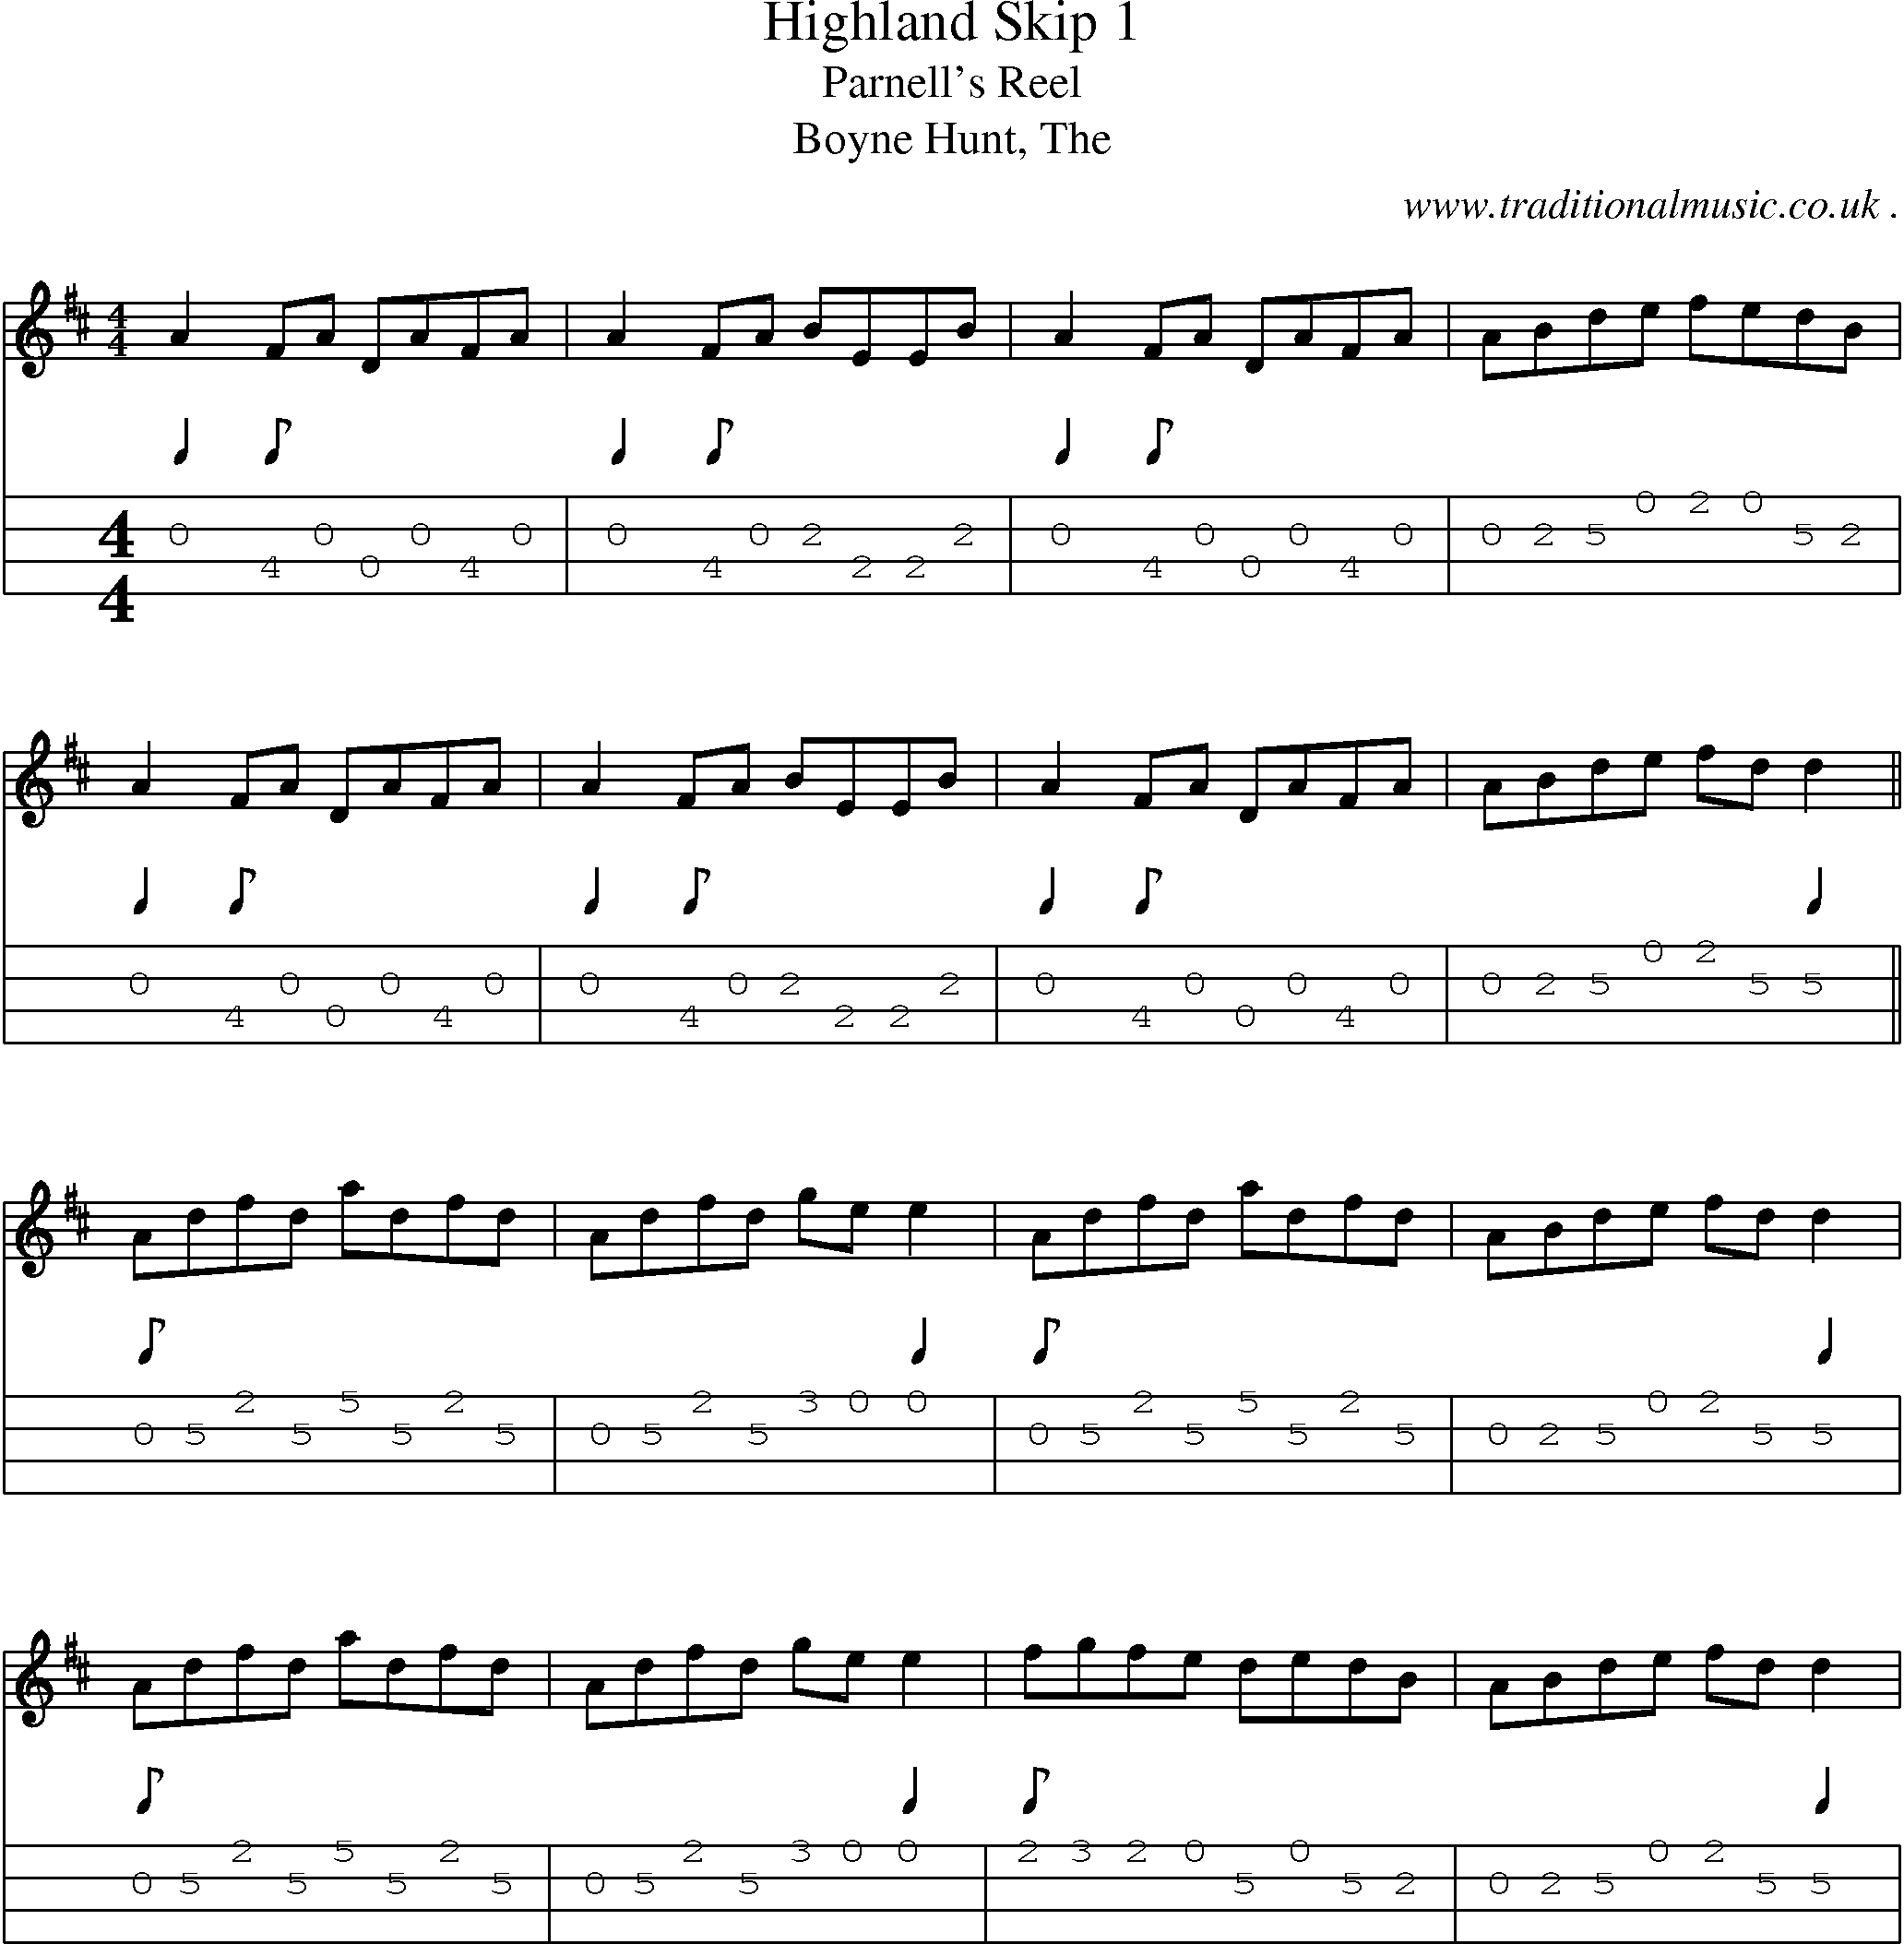 Sheet-music  score, Chords and Mandolin Tabs for Highland Skip 1